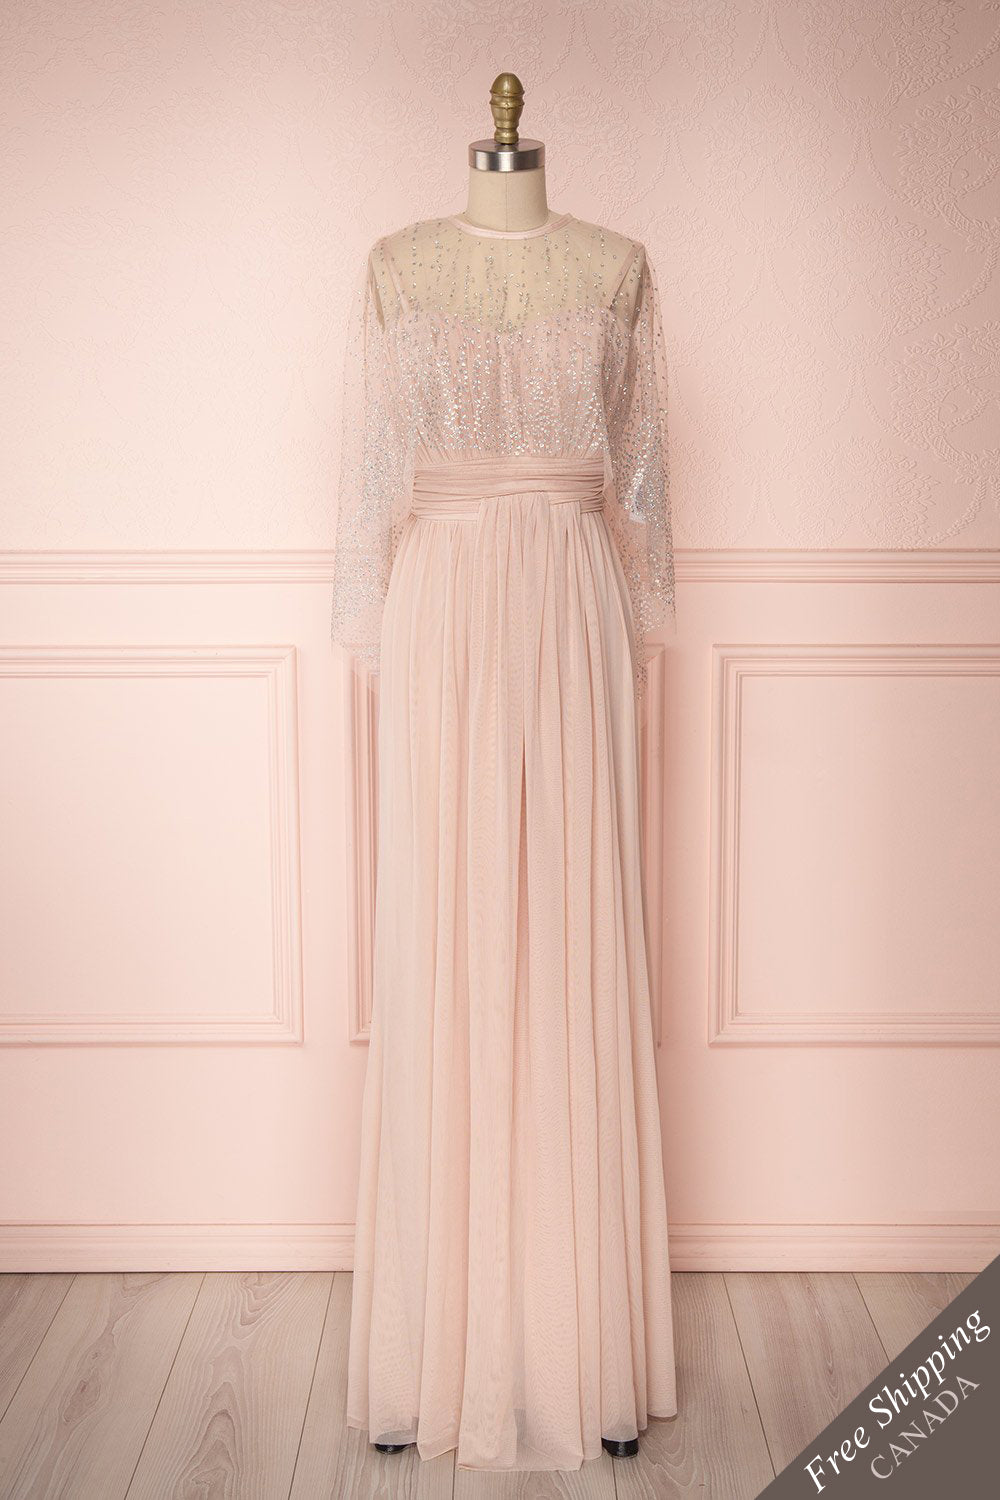 Tevaiho Blush Pink Gown w/ Silver Cape | Boutique 1861